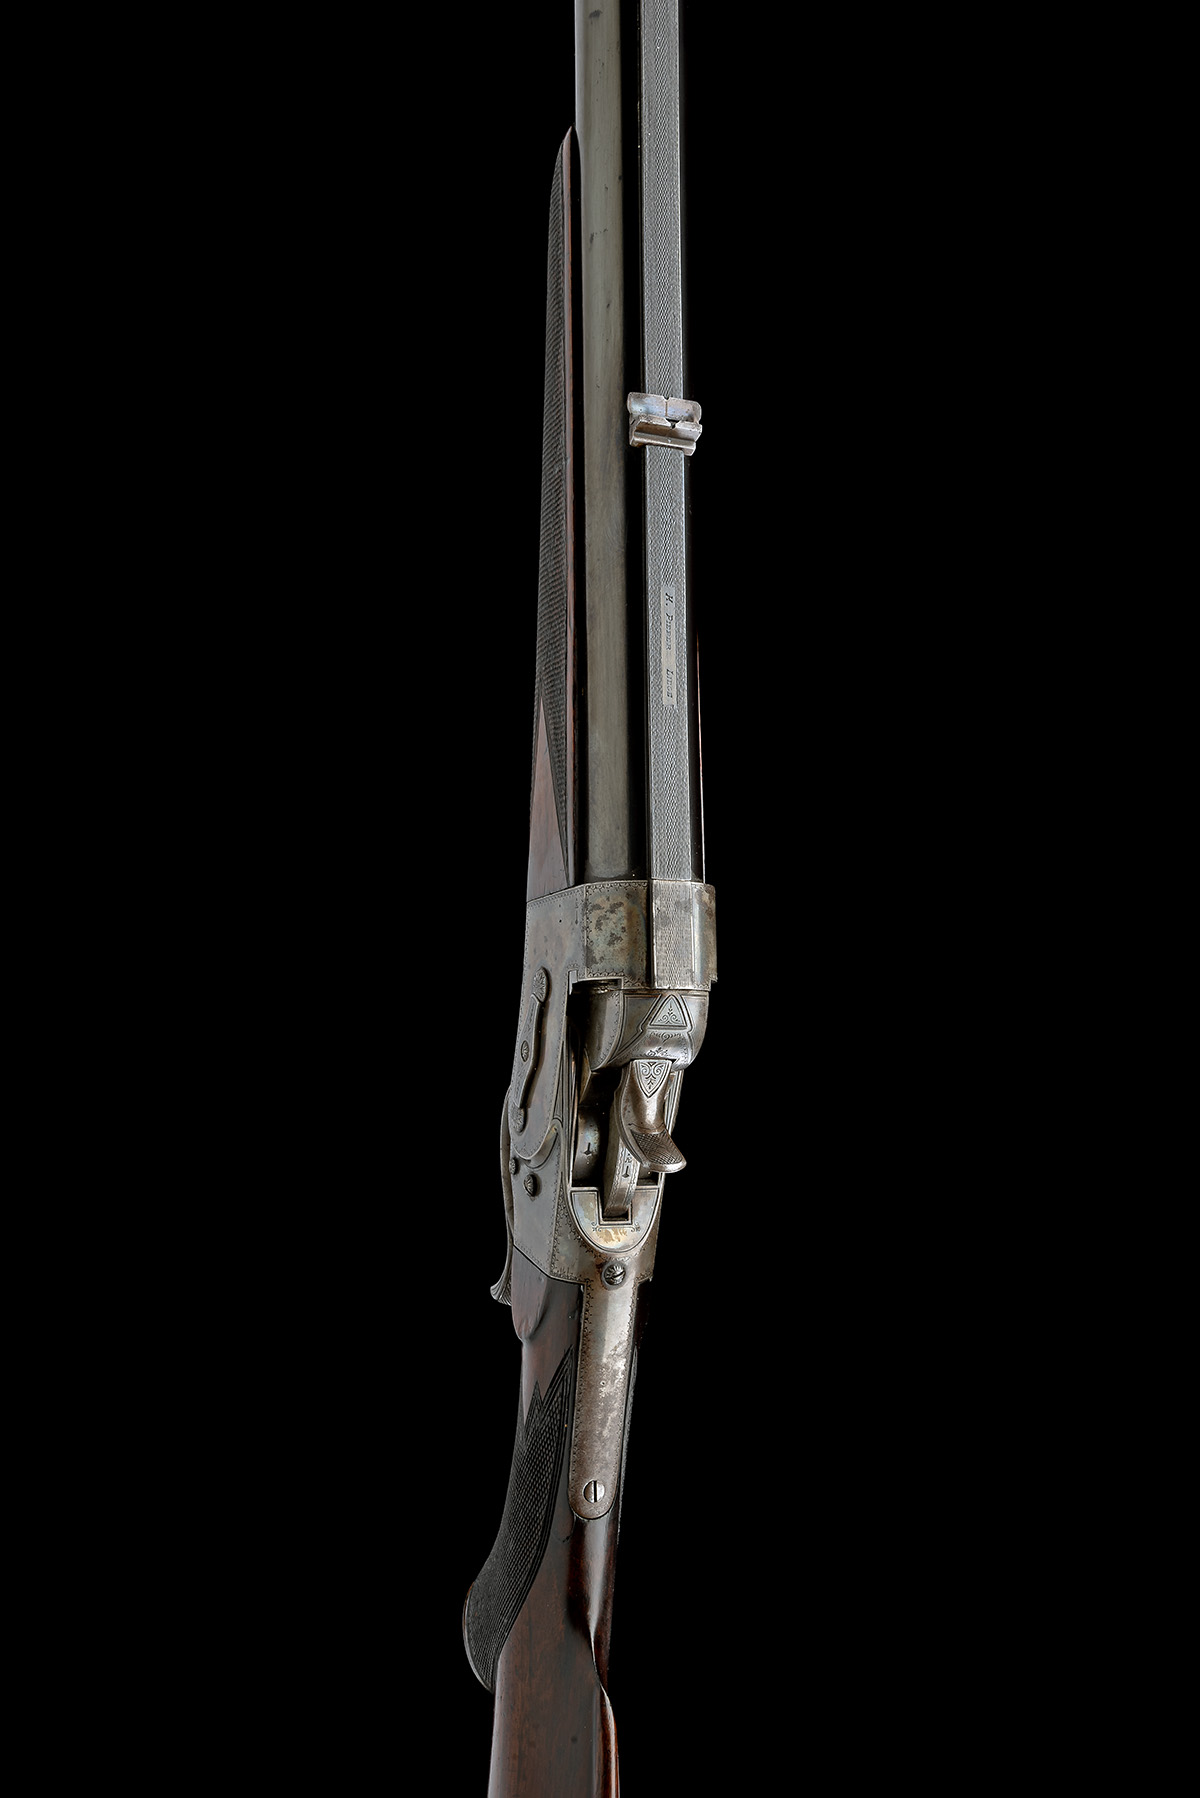 AN EXCEPTIONALLY RARE 7mm (RIMFIRE) SEVEN-SHOT ROLLING-BLOCK VOLLEY RIFLE SIGNED M. PIEPER, LIEGE, - Image 4 of 10